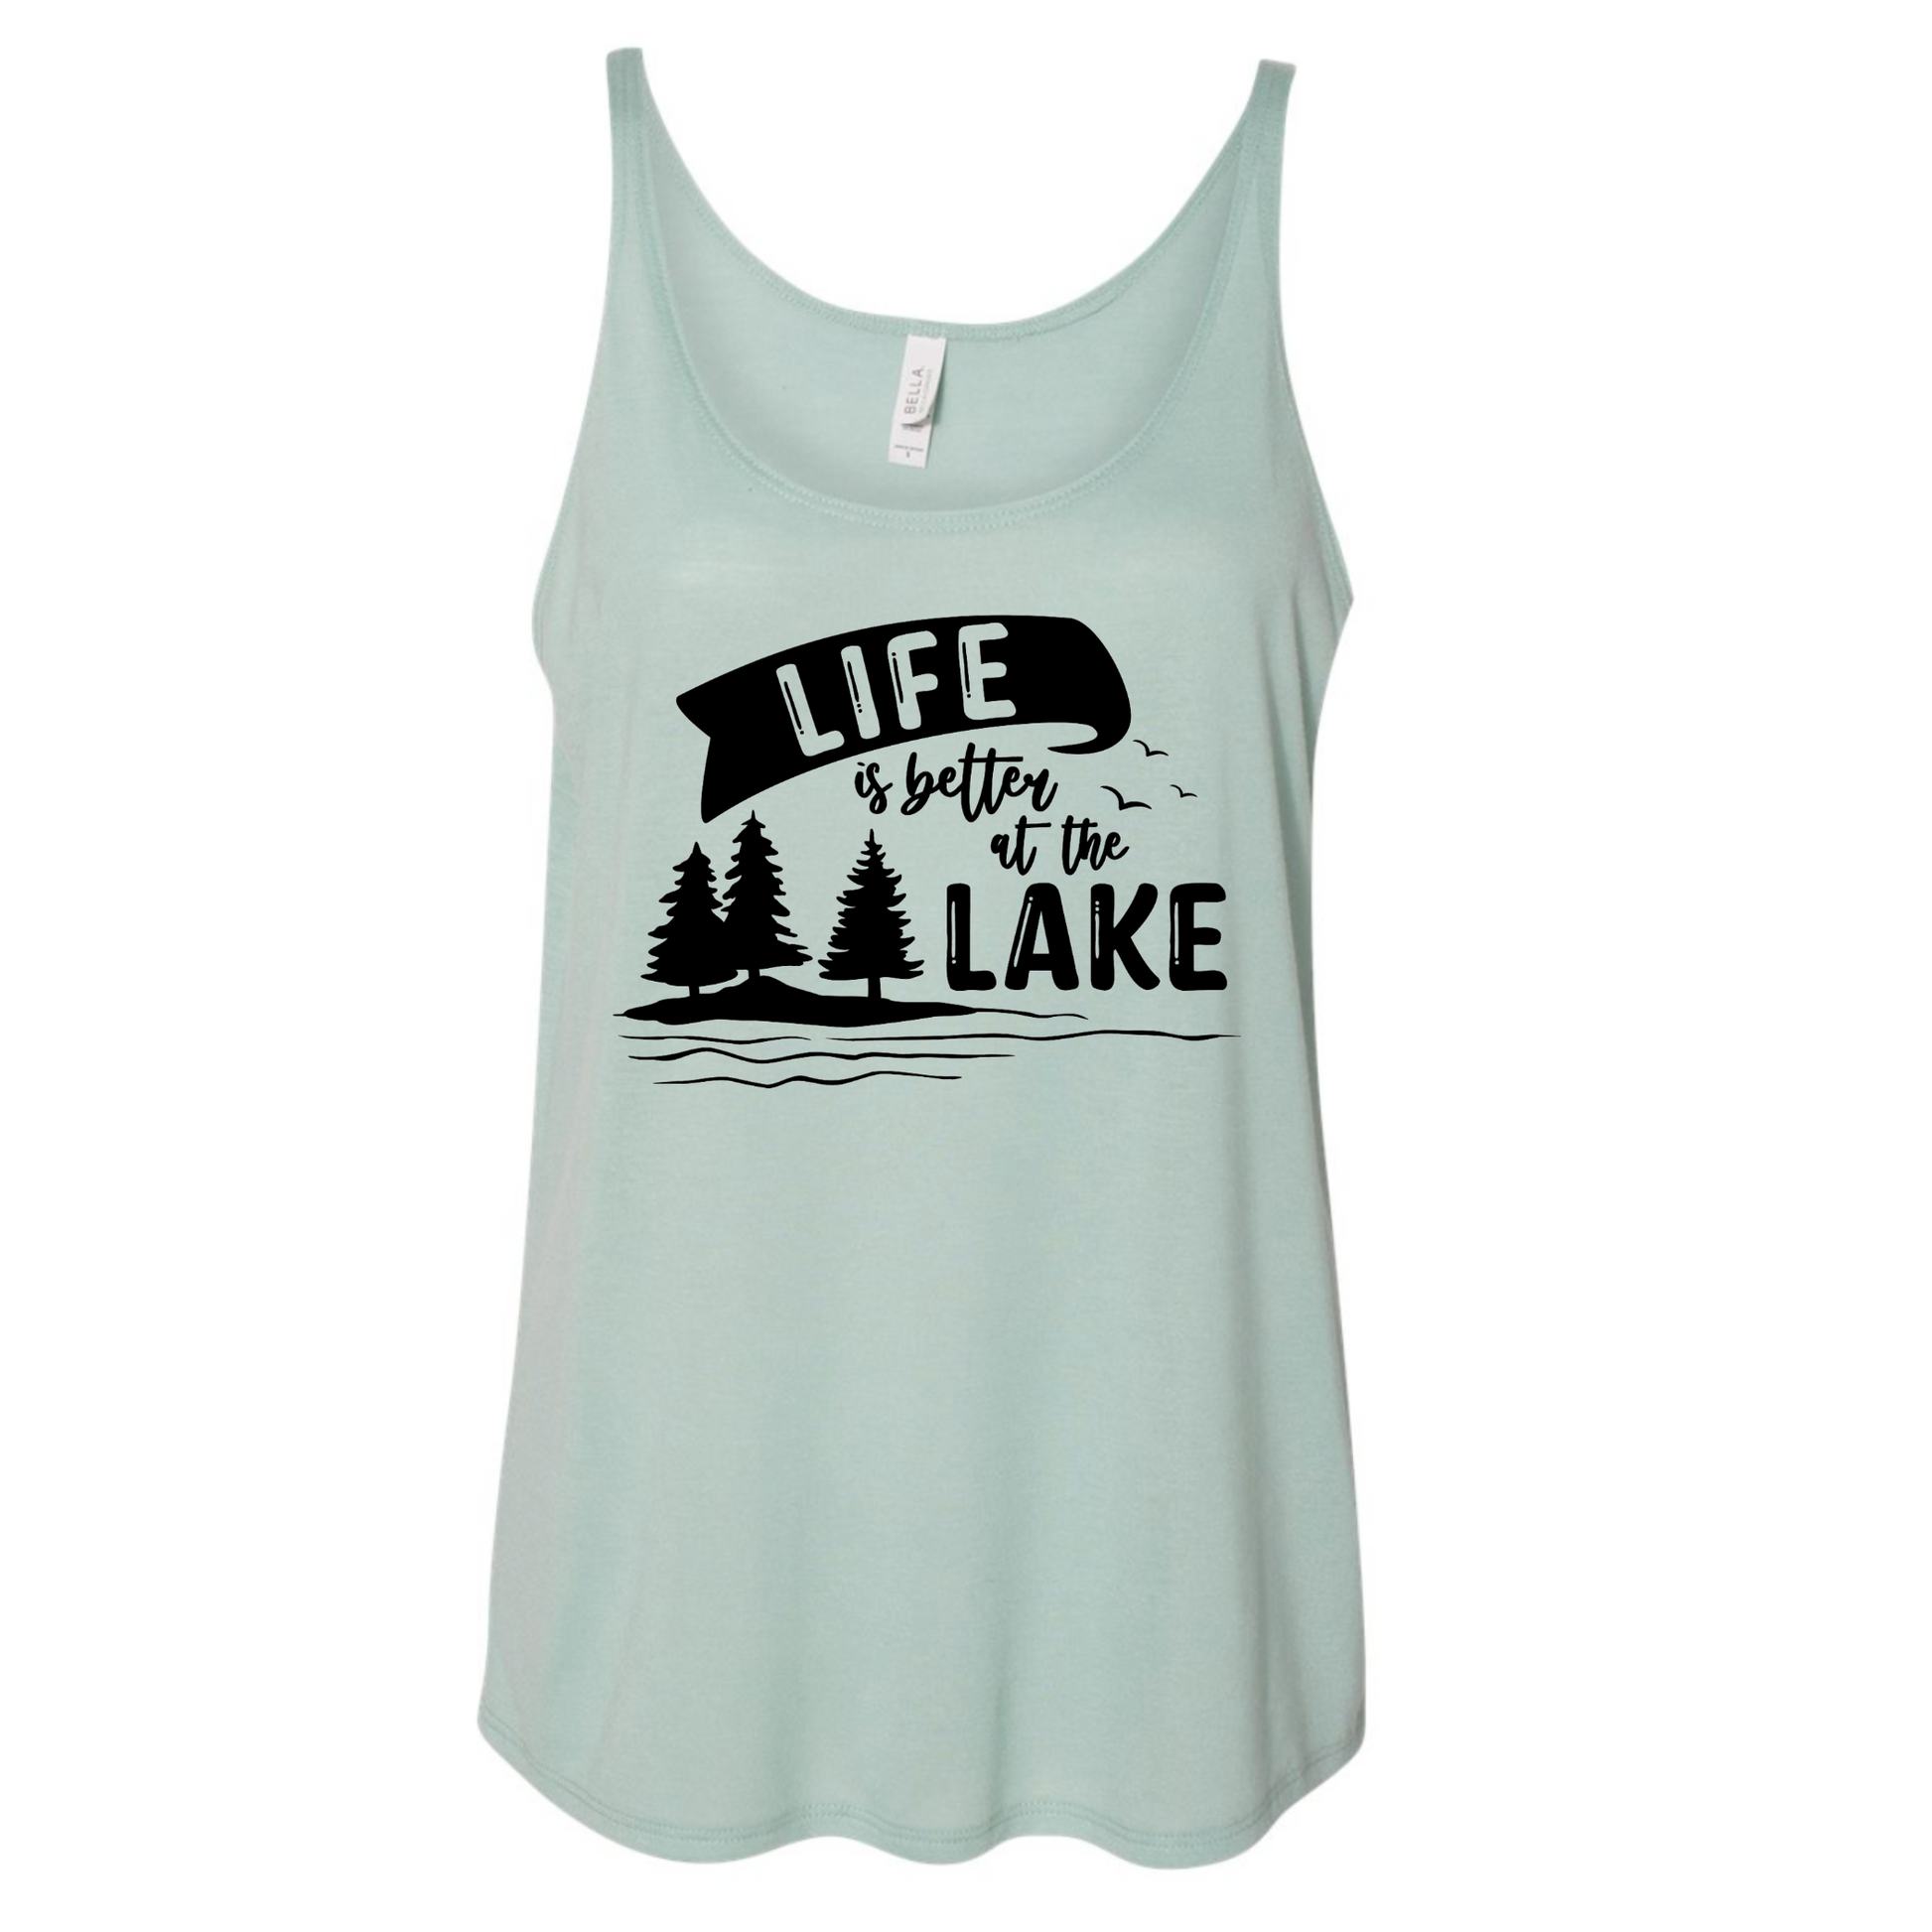 Life Is Better at The Lake Slouchy Tank Top for Women Apparel 2XL / Muave